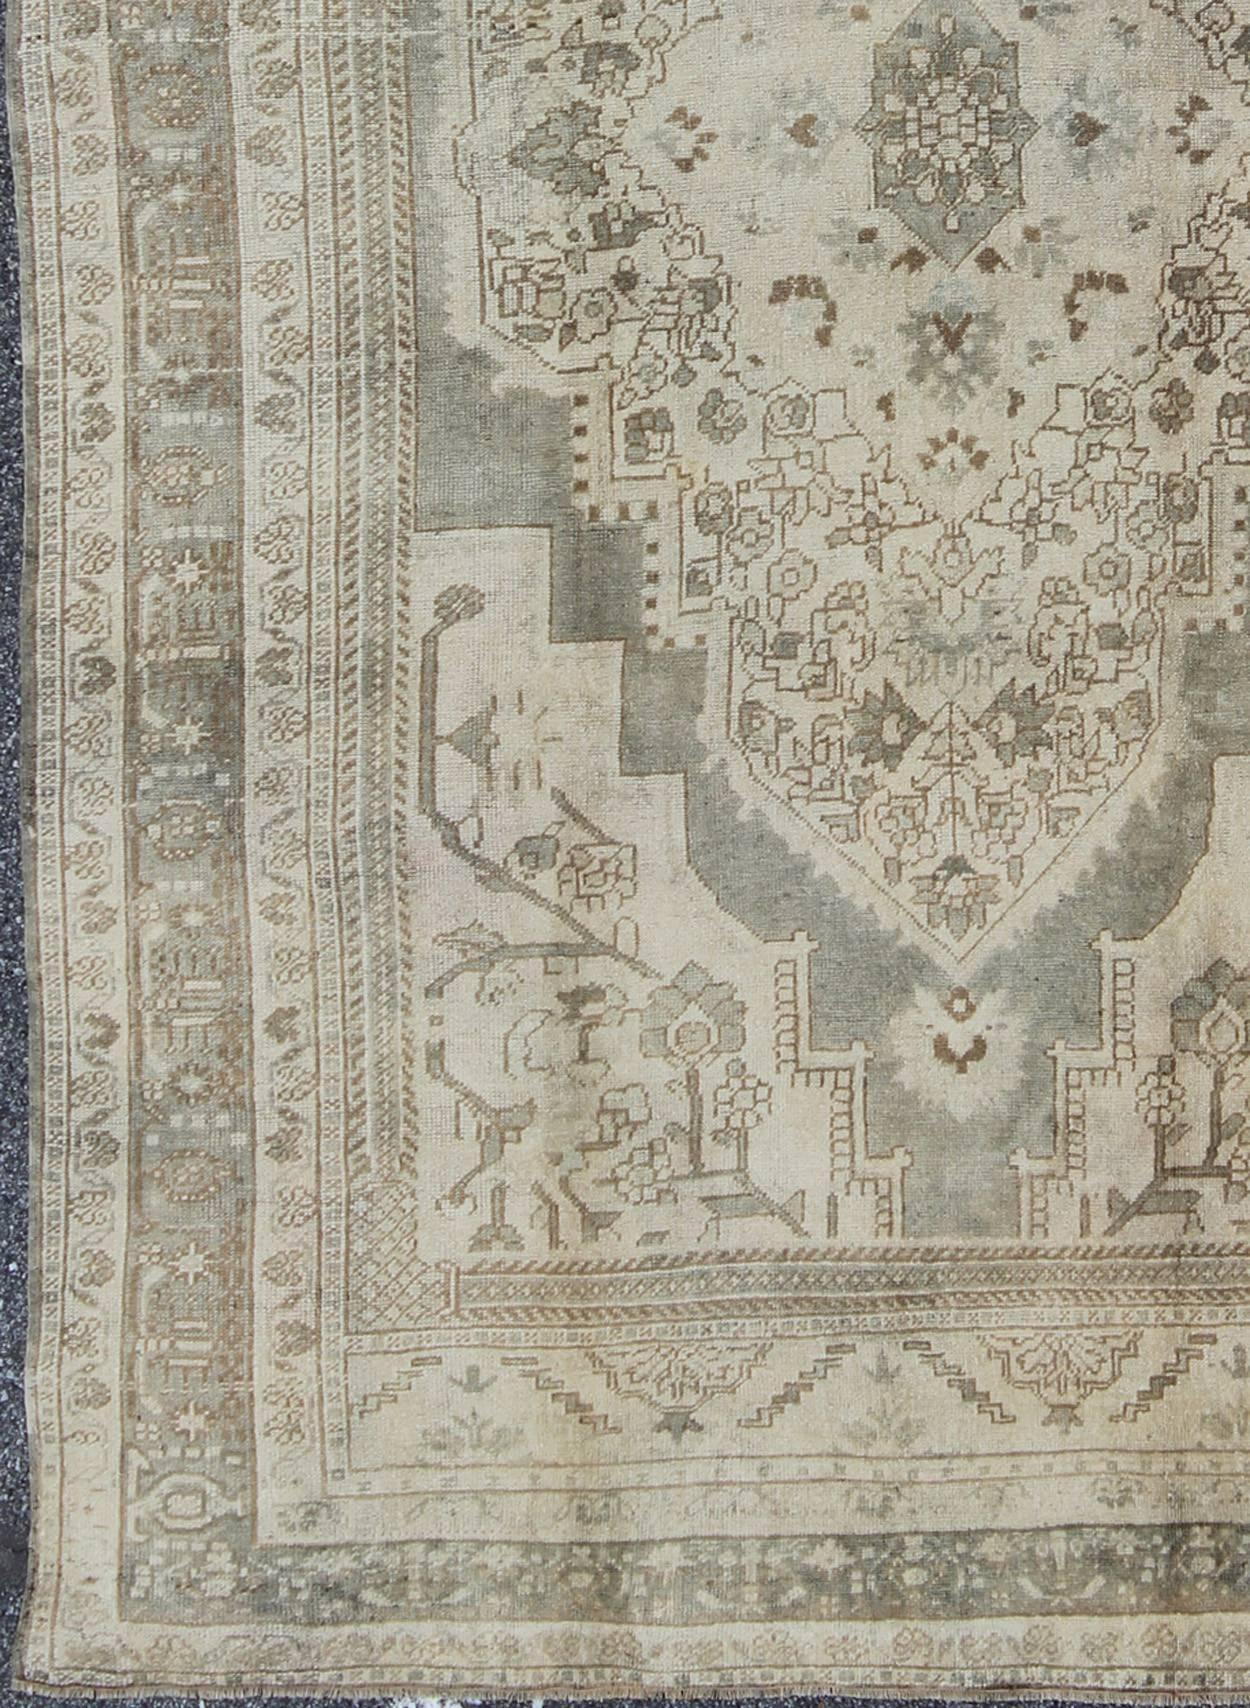 Vintage Turkish Oushak rug with floral medallion design in ivory and gray, rug mte-95184, country of origin / type: Turkey / Oushak, circa mid-20th century

This vintage Turkish Oushak carpet (circa mid-20th century) features a floral central